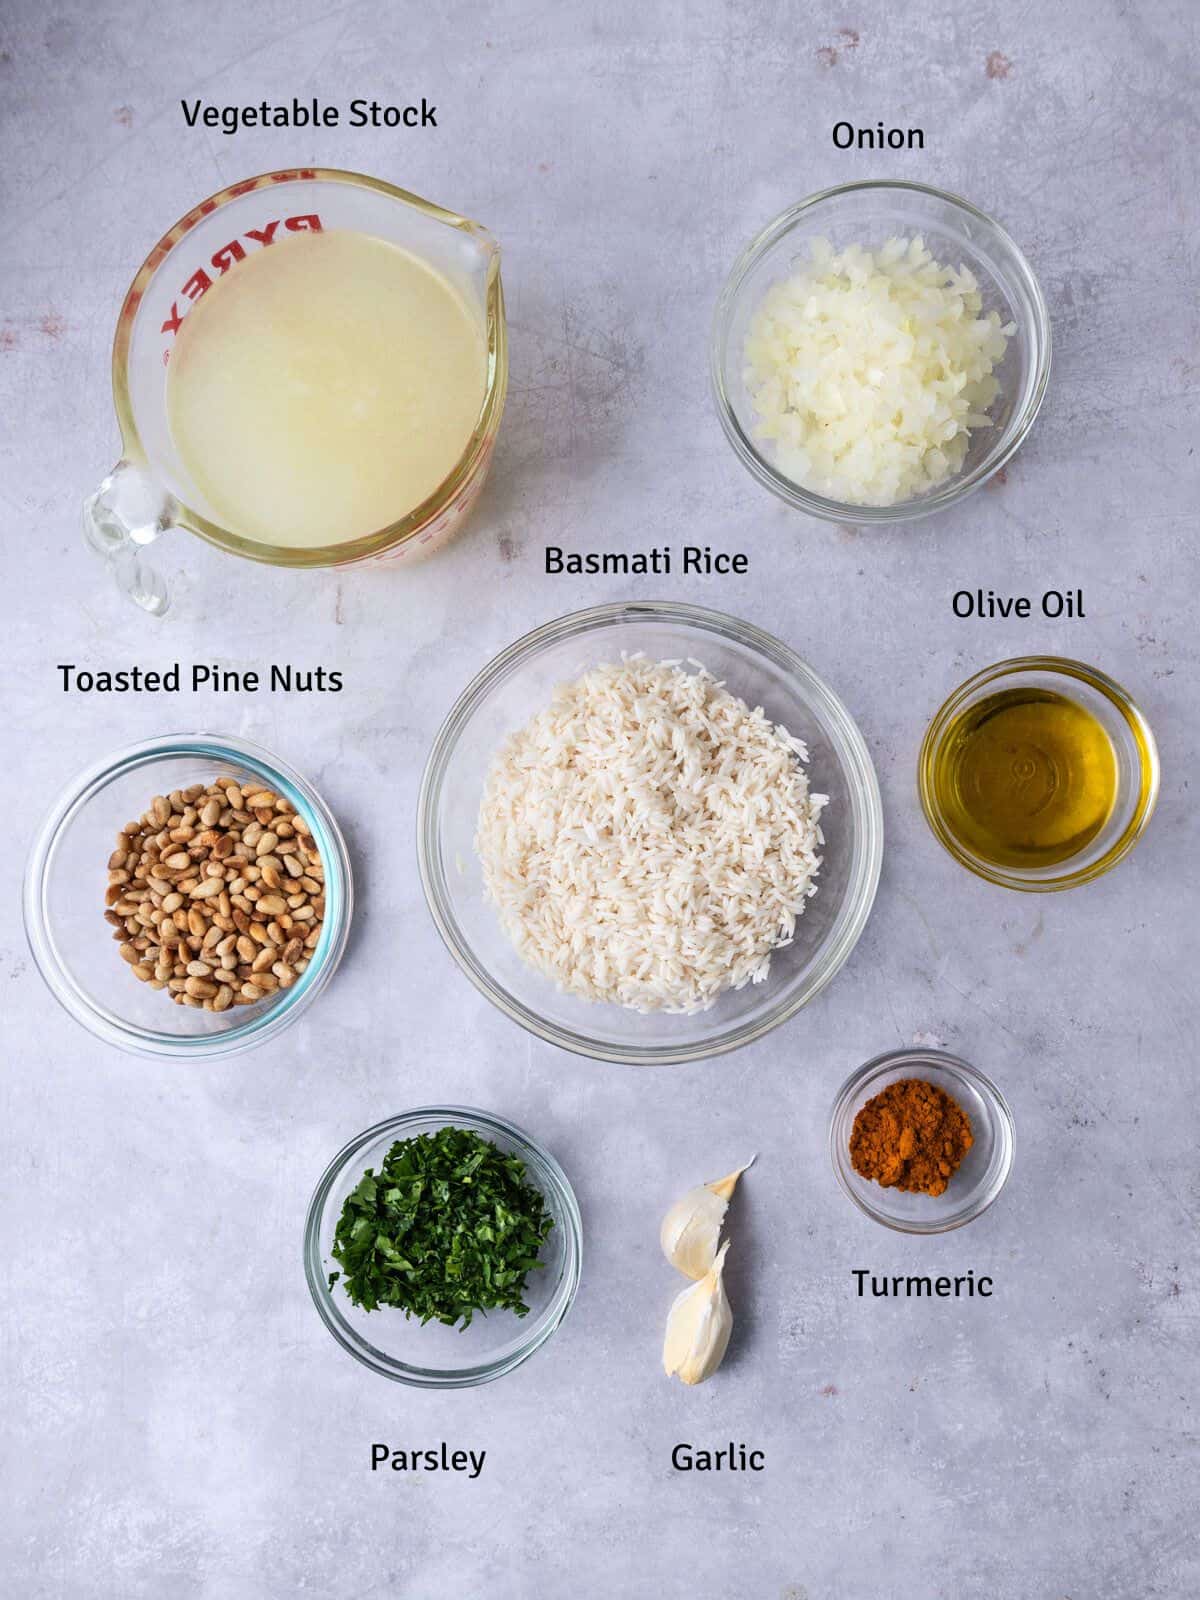 Ingredients for yellow Mediterranean rice, including basmati rice, olive oil and pine nuts.